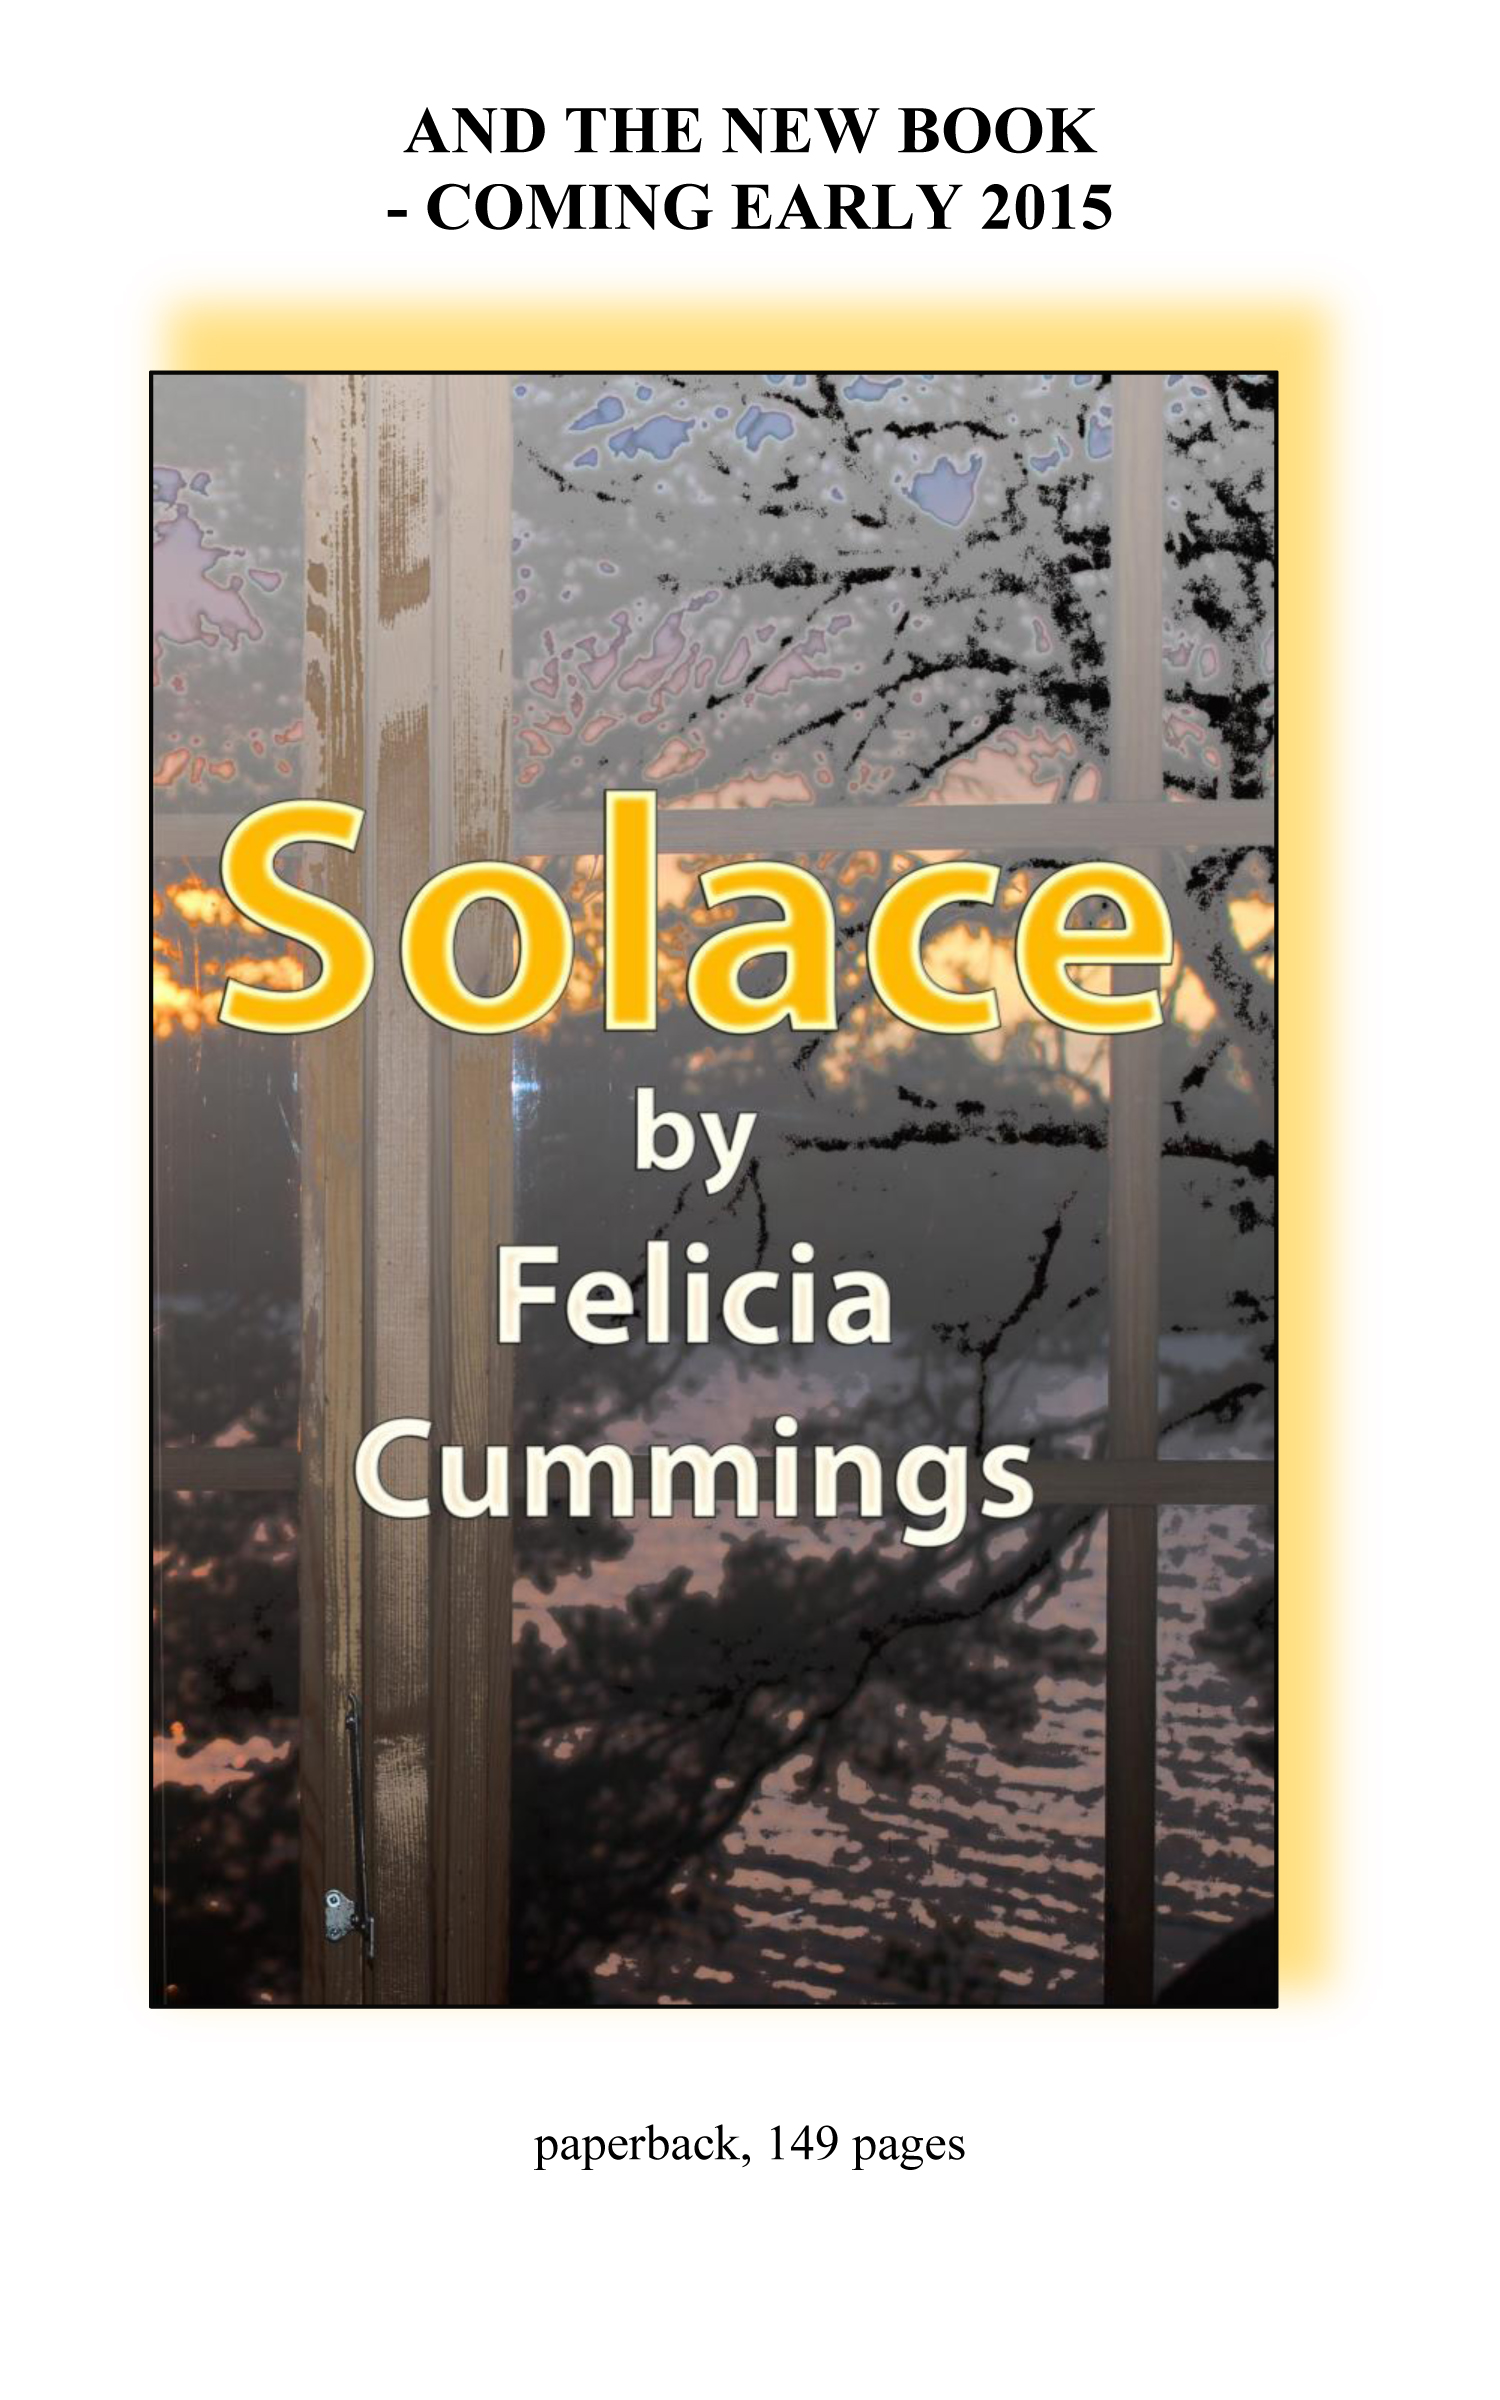 Solace - A New Book by Felicia Cummings